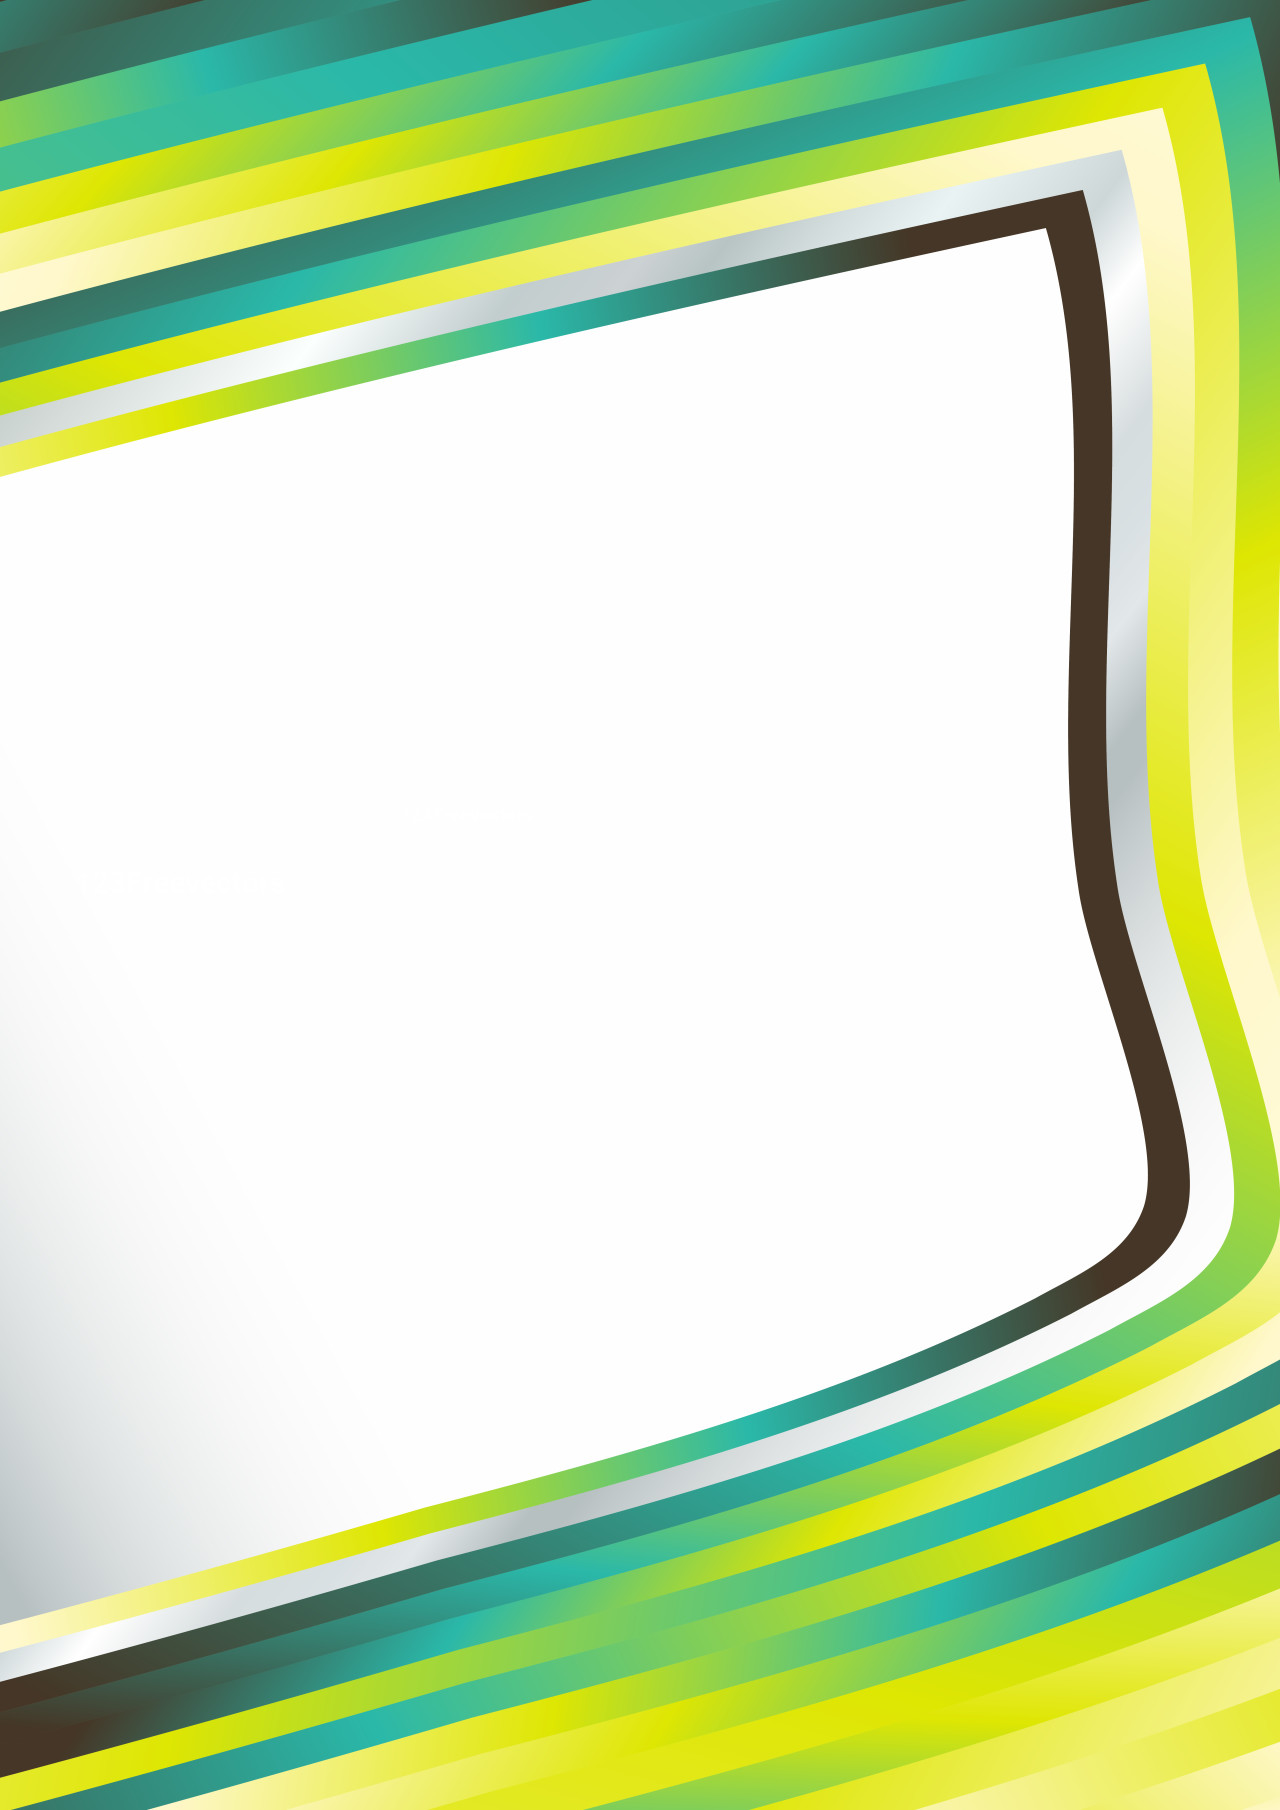 Blue Green and Yellow Border Frame Background Graphic